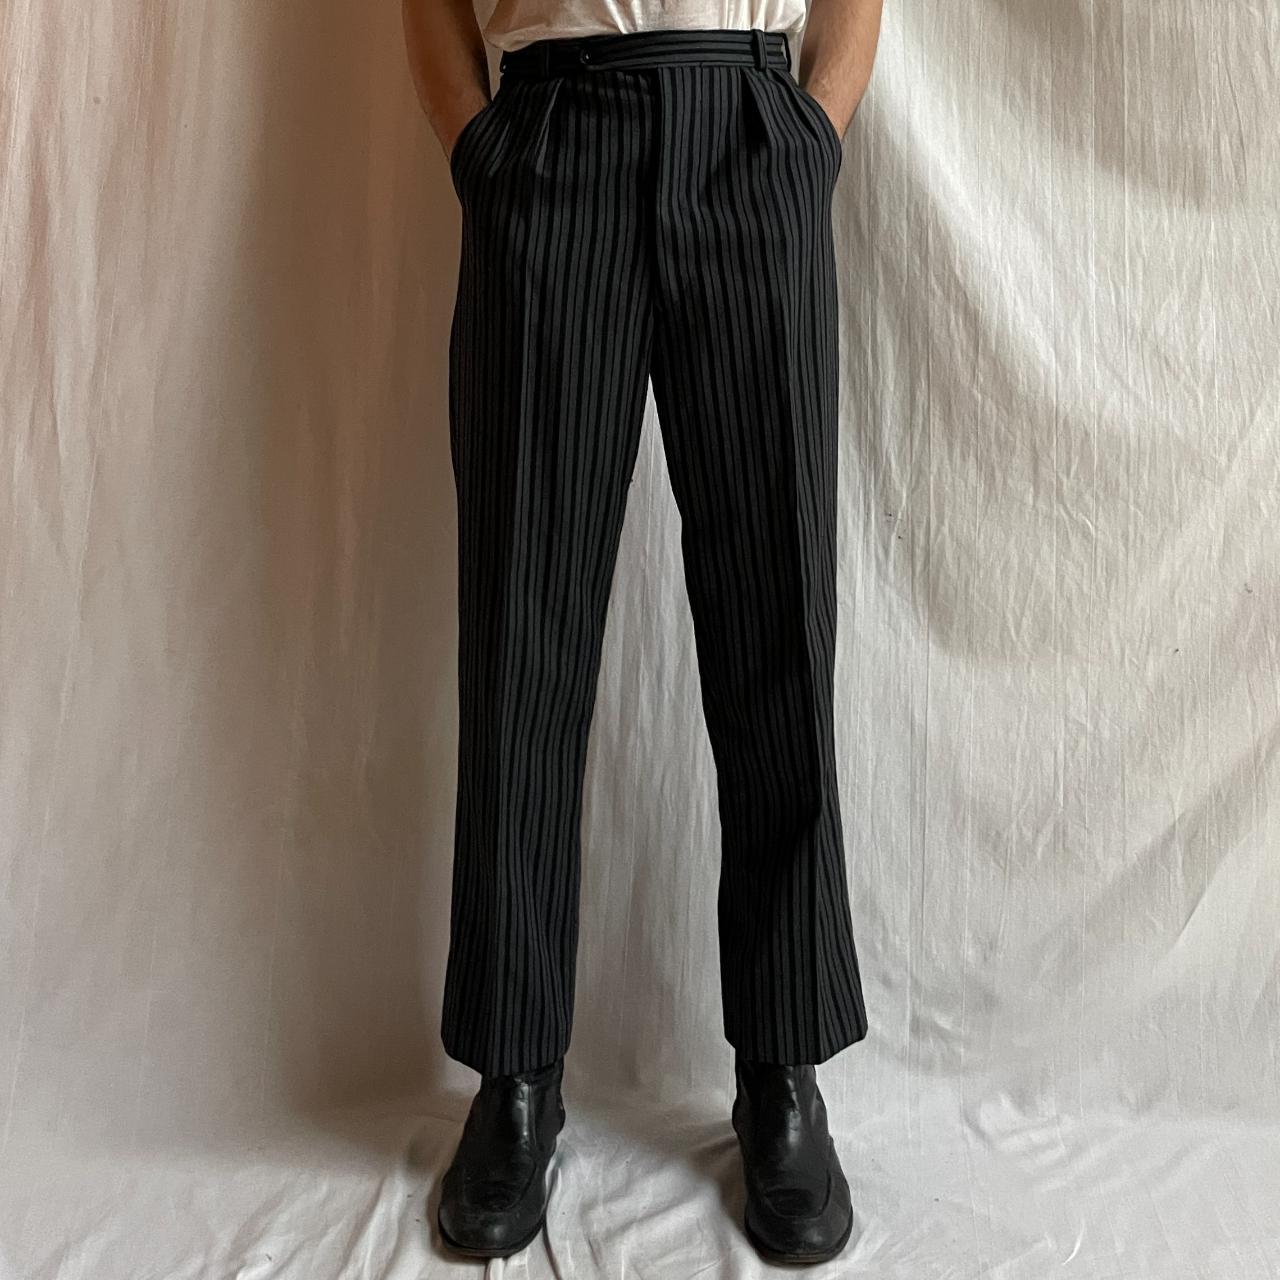 Vintage 1940s/50s tailored trousers, cut with a... - Depop